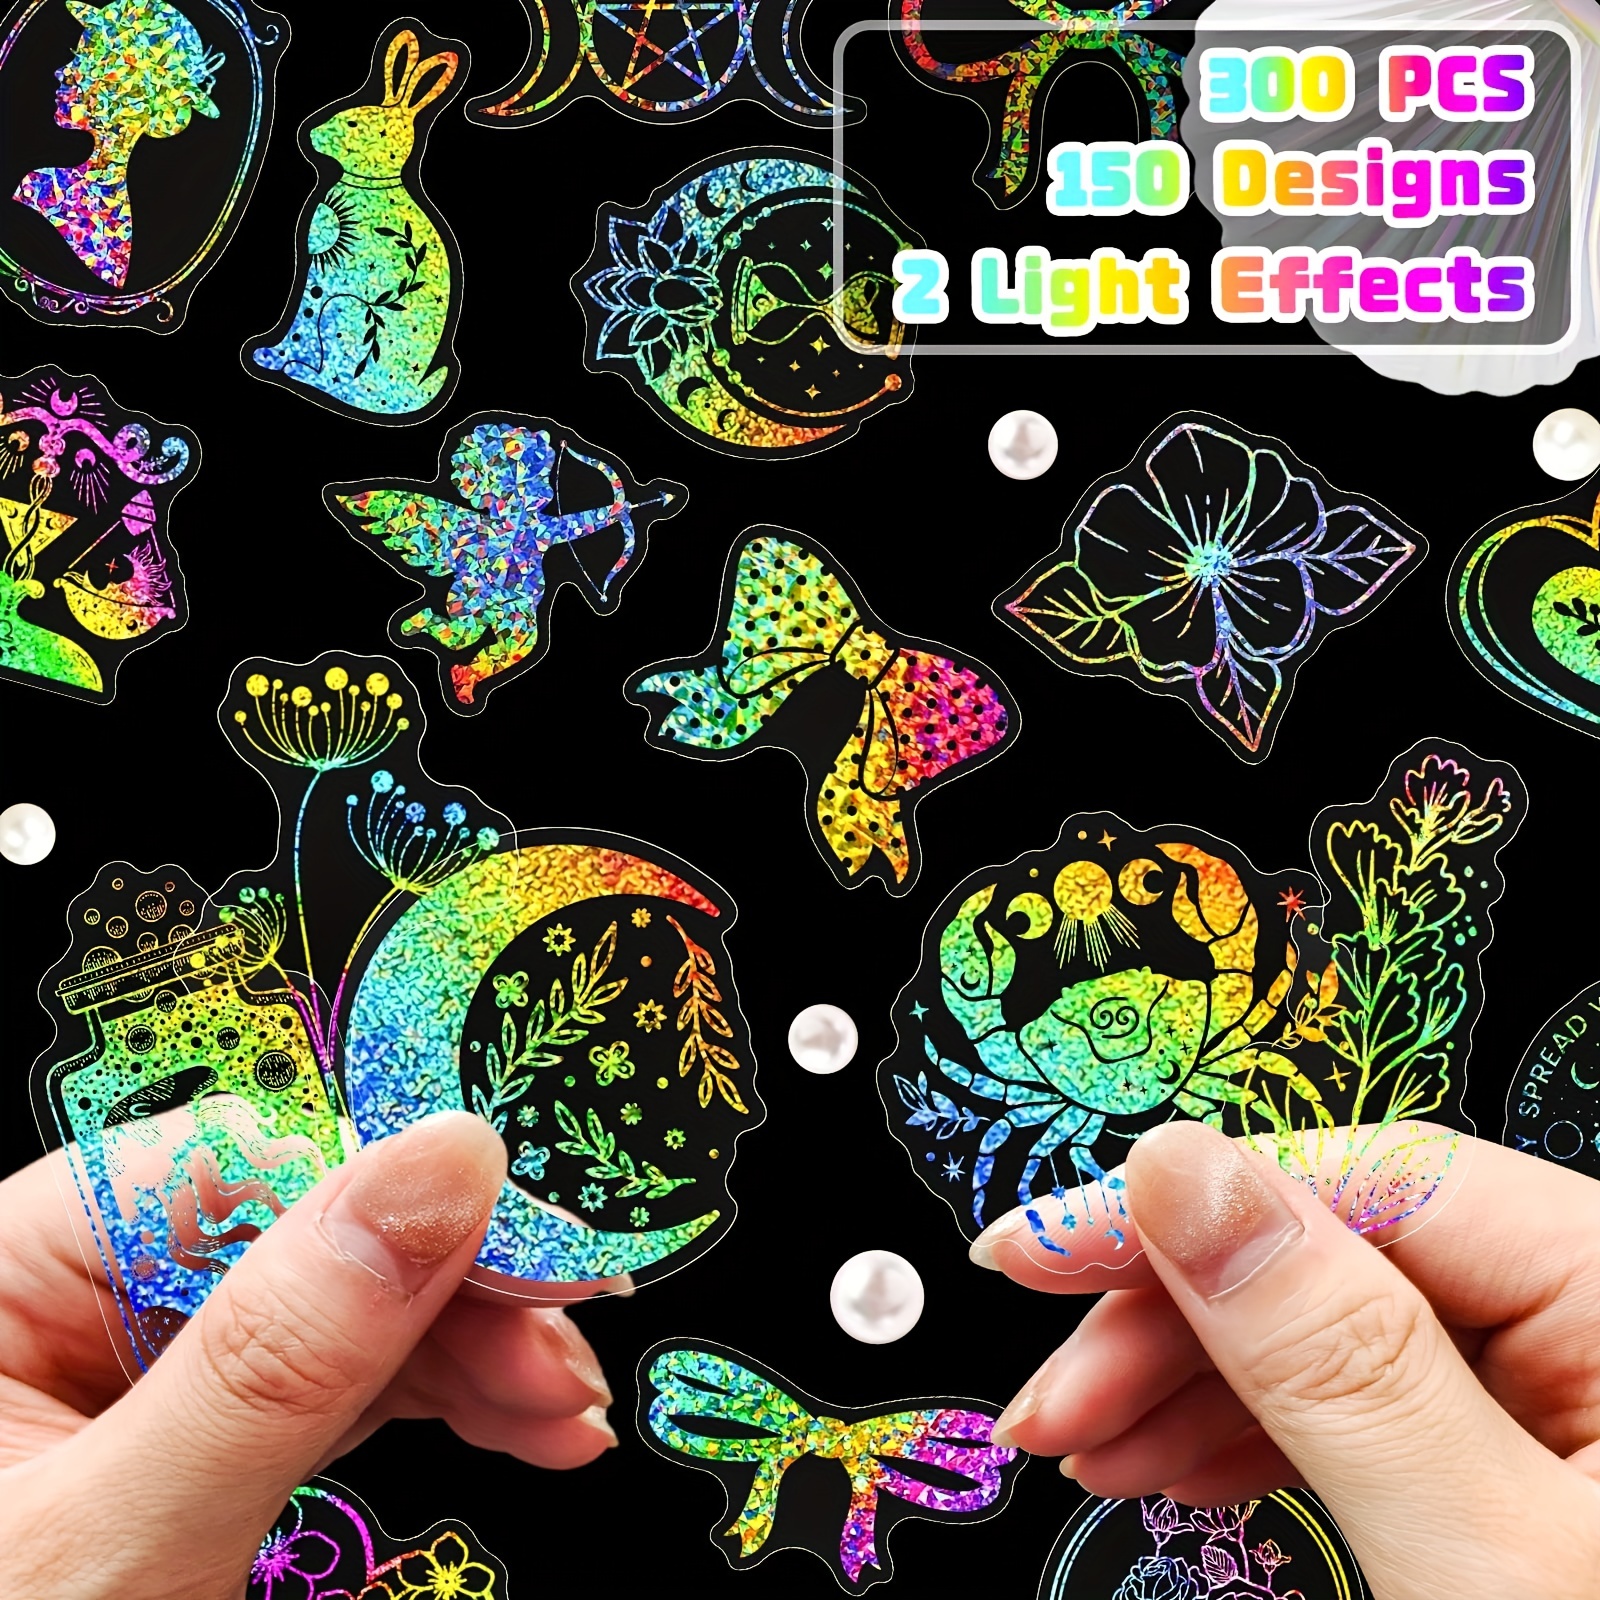 300 PCS Holographic Stickers,DIY Decorative Resin Stickers for